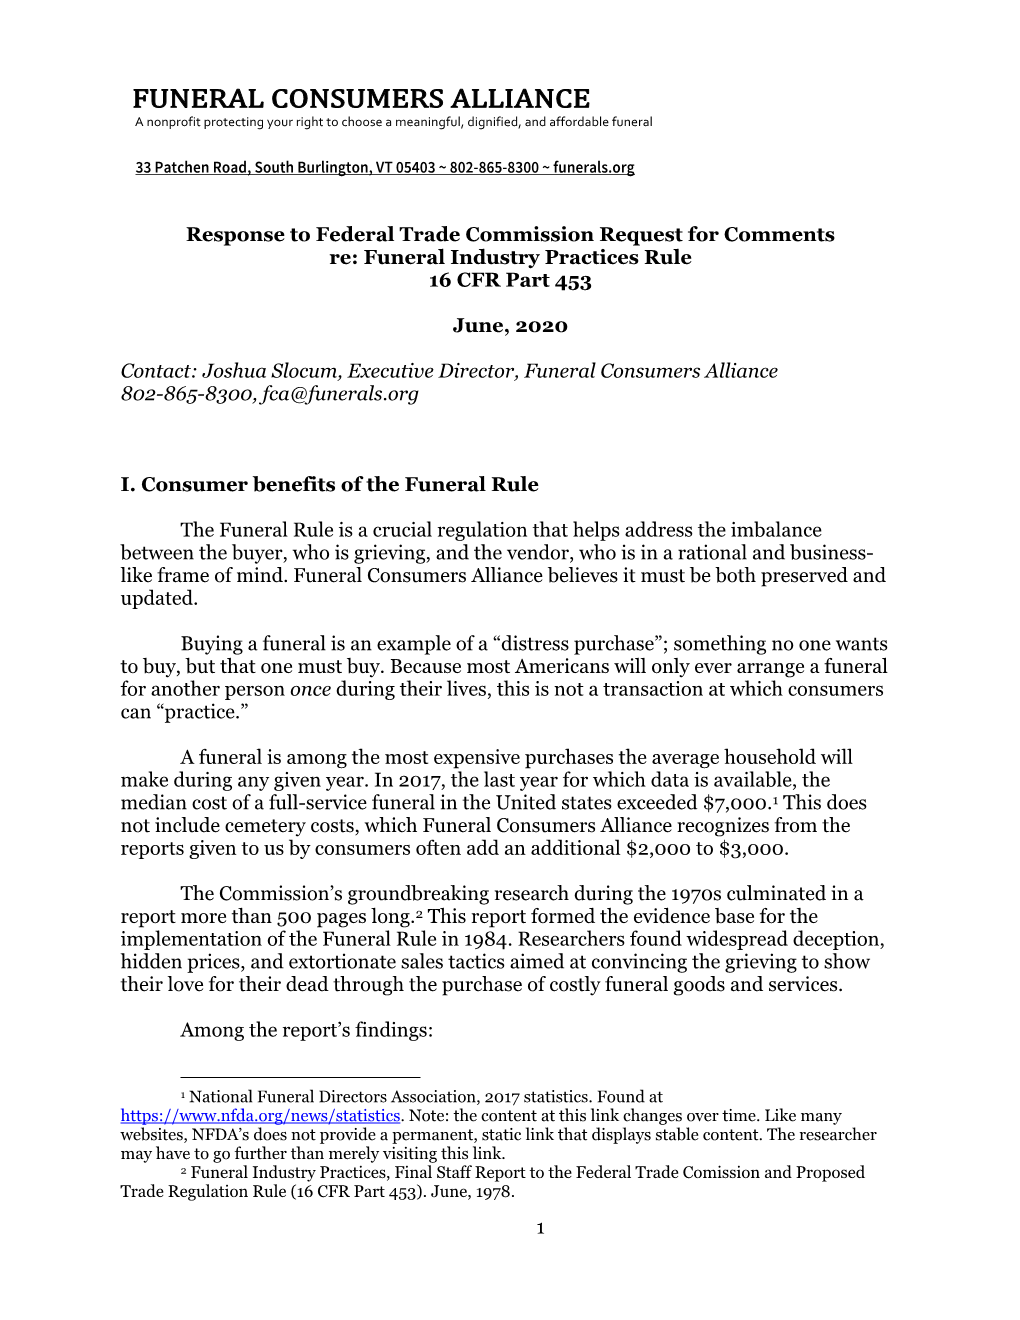 Funeral Consumers Alliance: Submission to the Federal Trade